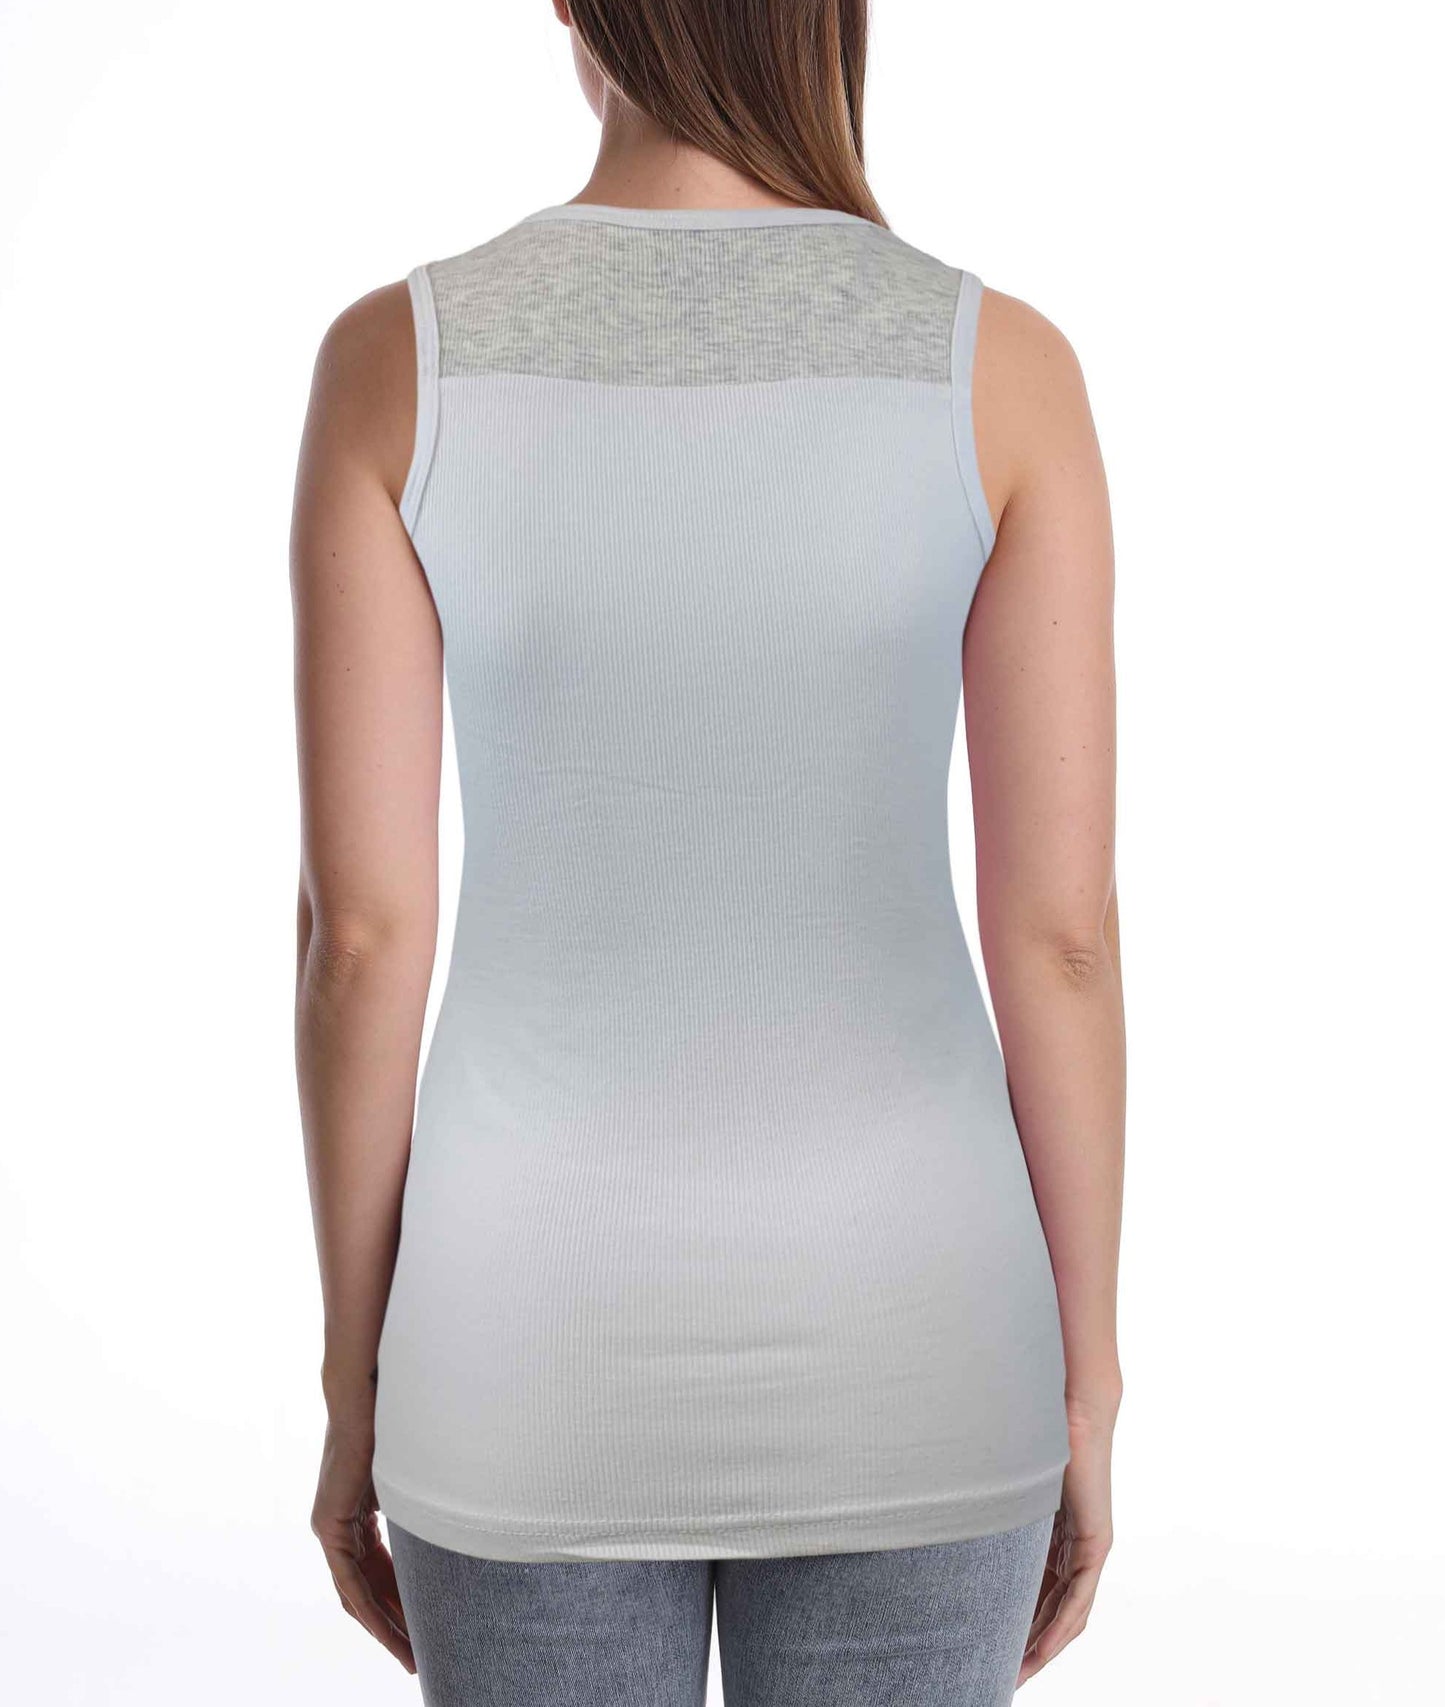 SUMONA Women Round Neck Accent Grey Two Tone Casual Basic Ribbed Tank Top